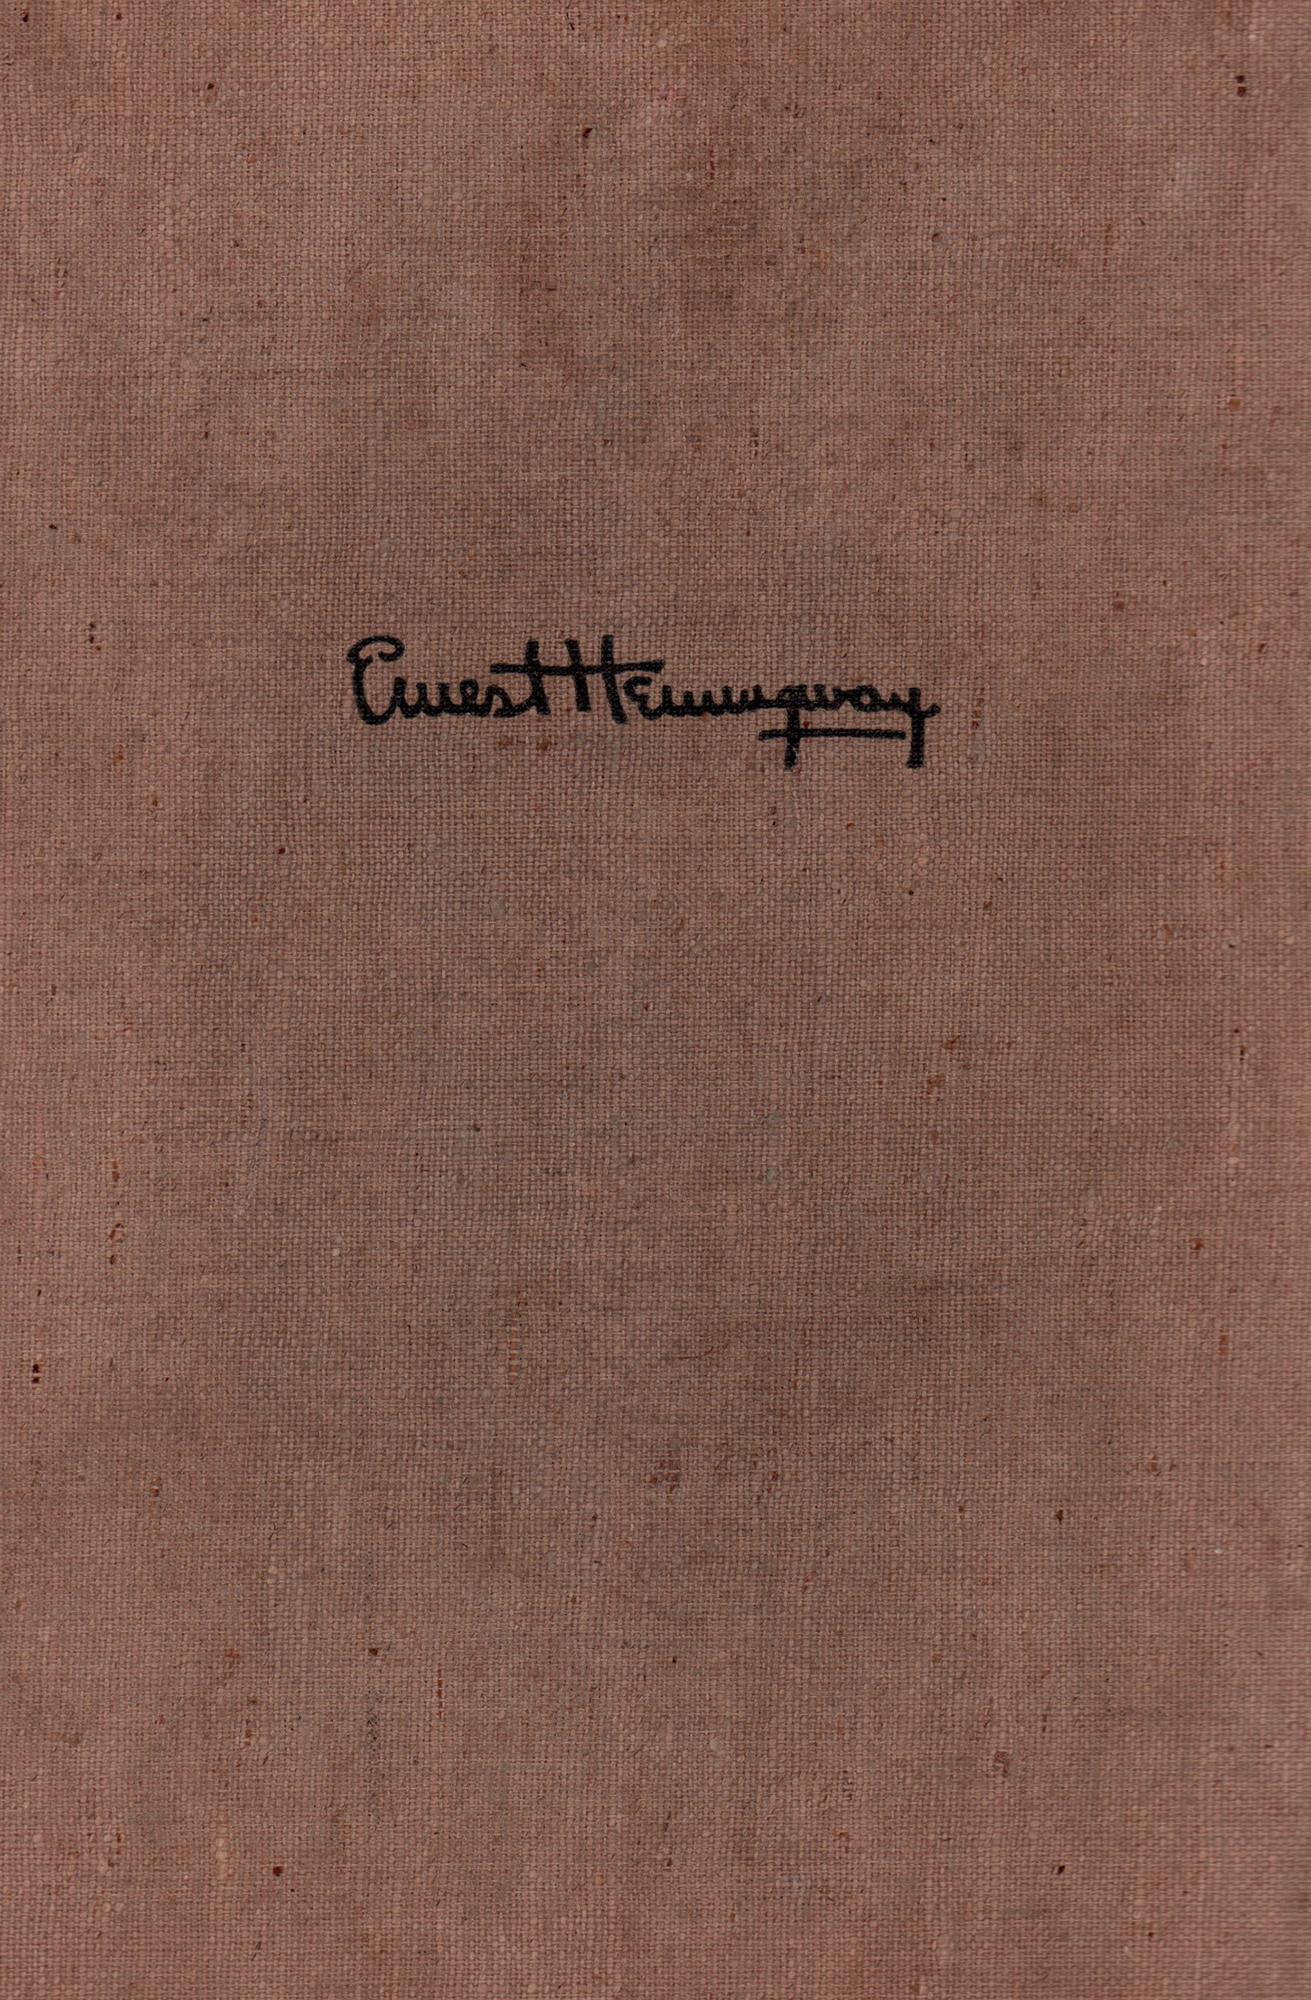 Paper Ernest Hemingway's For Whom The Bell Tolls, First Edition 1940